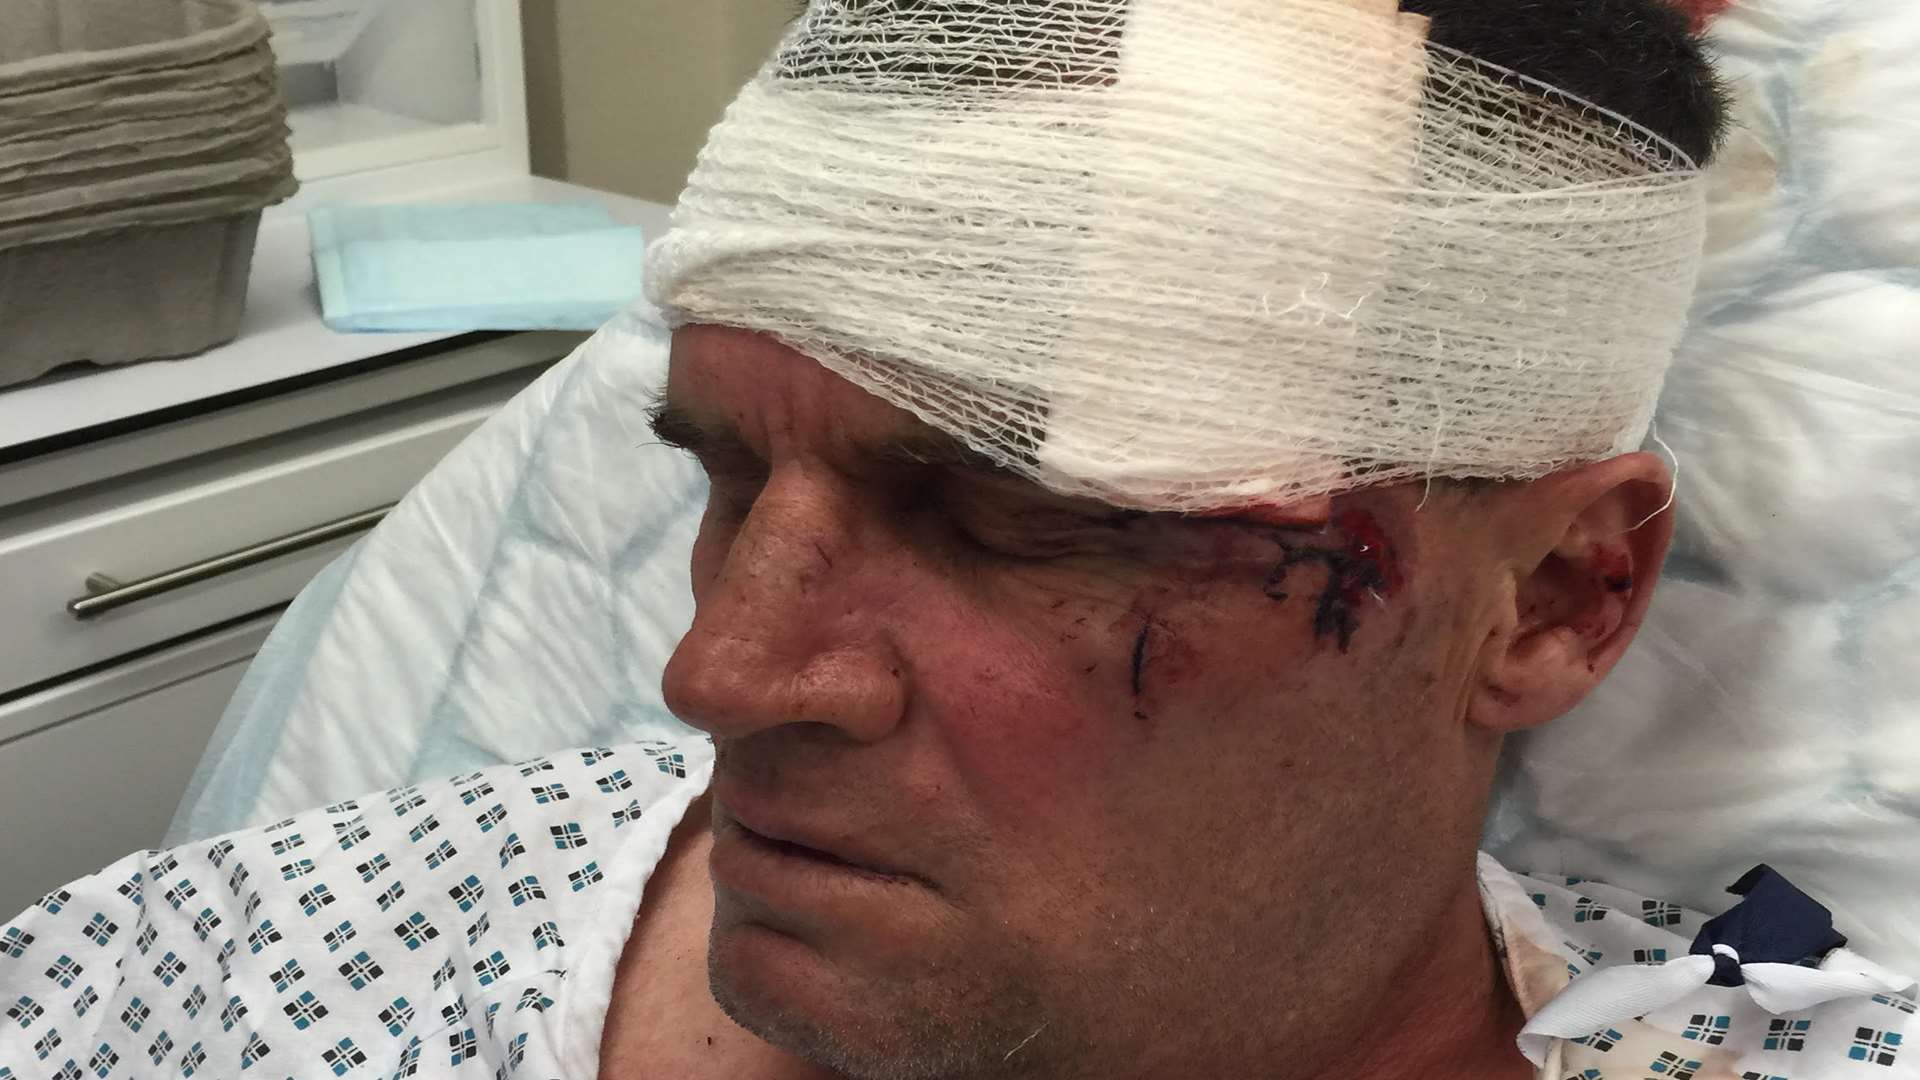 Stephen Friday who was rundown by a hit-and-run driver in Sheerness